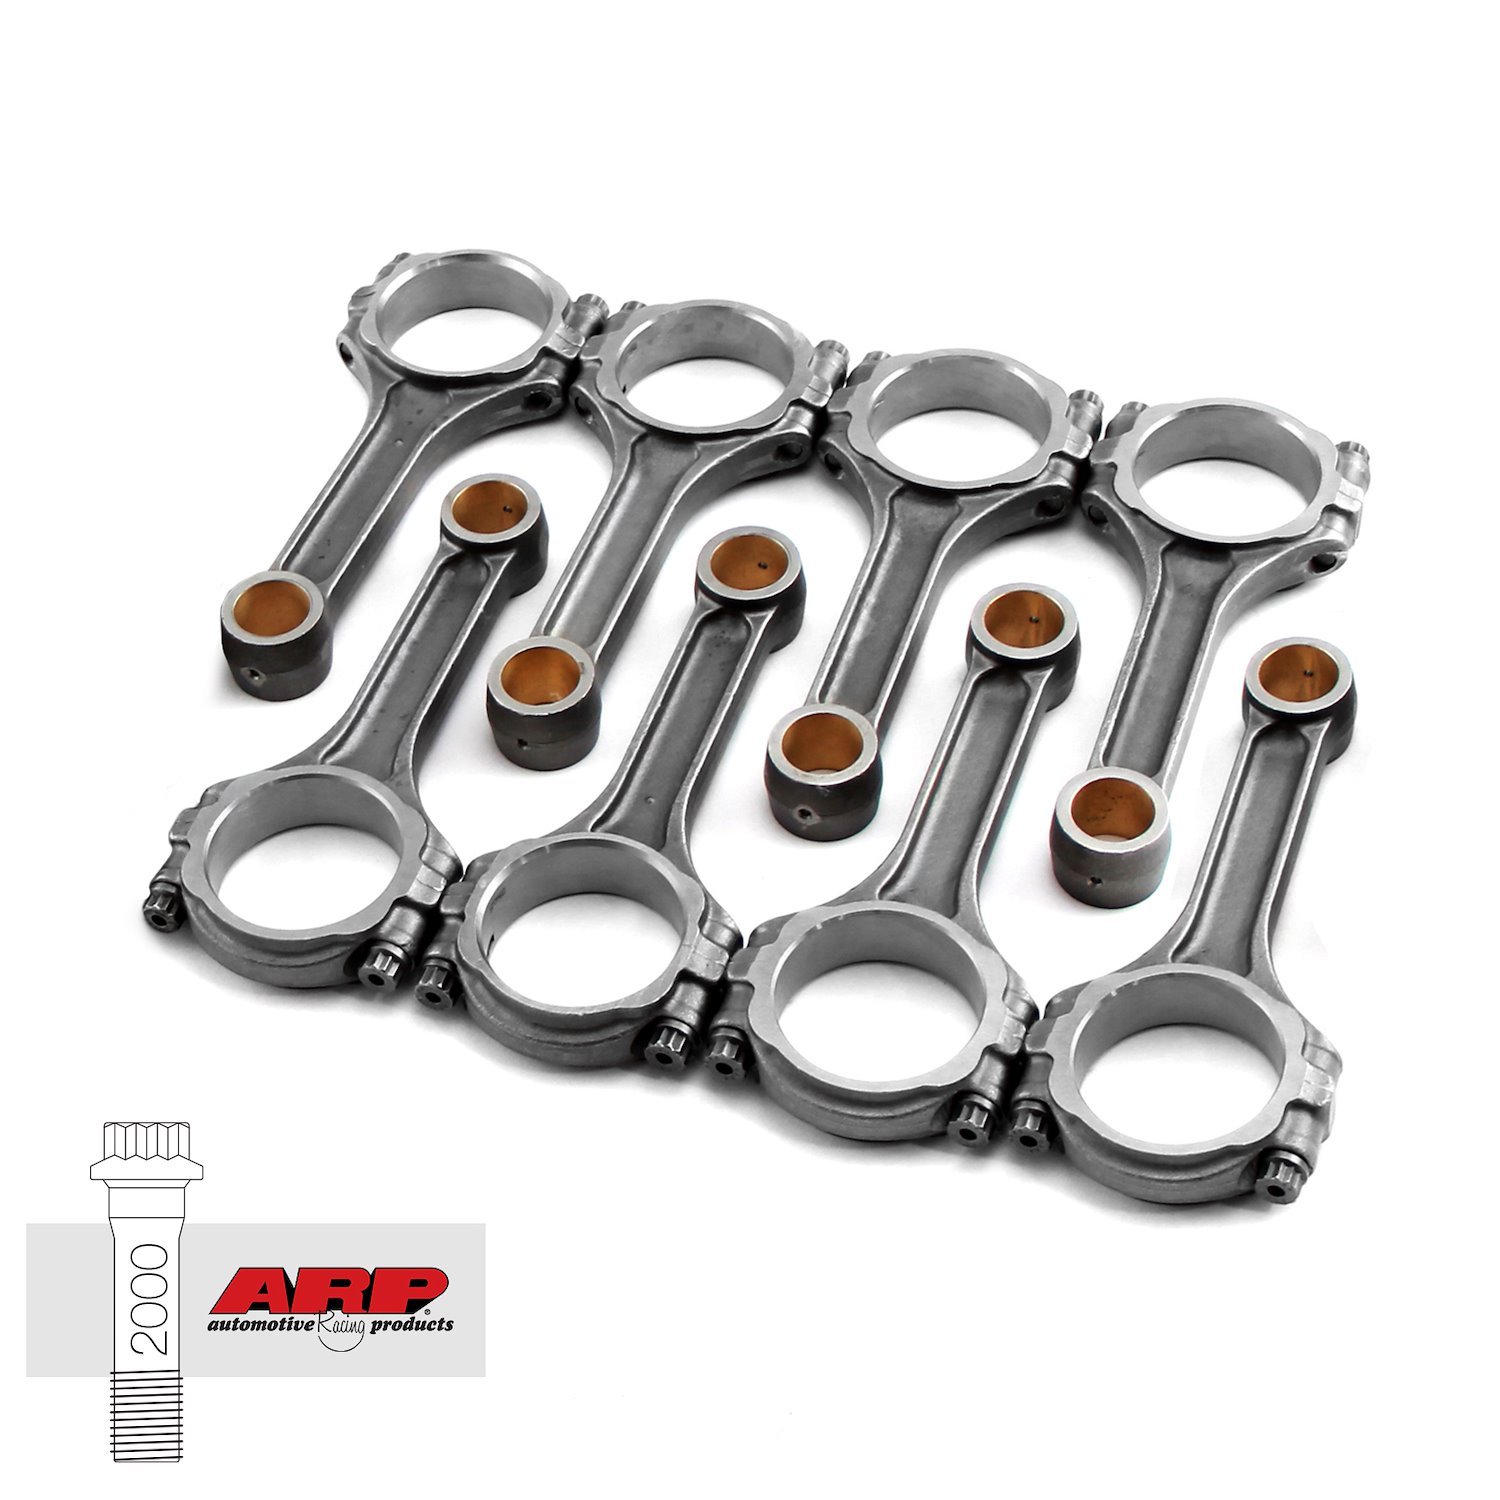 I BEAM 5.956 2.310 .912 5140 CONNECTING RODS FORD 351 WINDSOR W/ ARP 2000